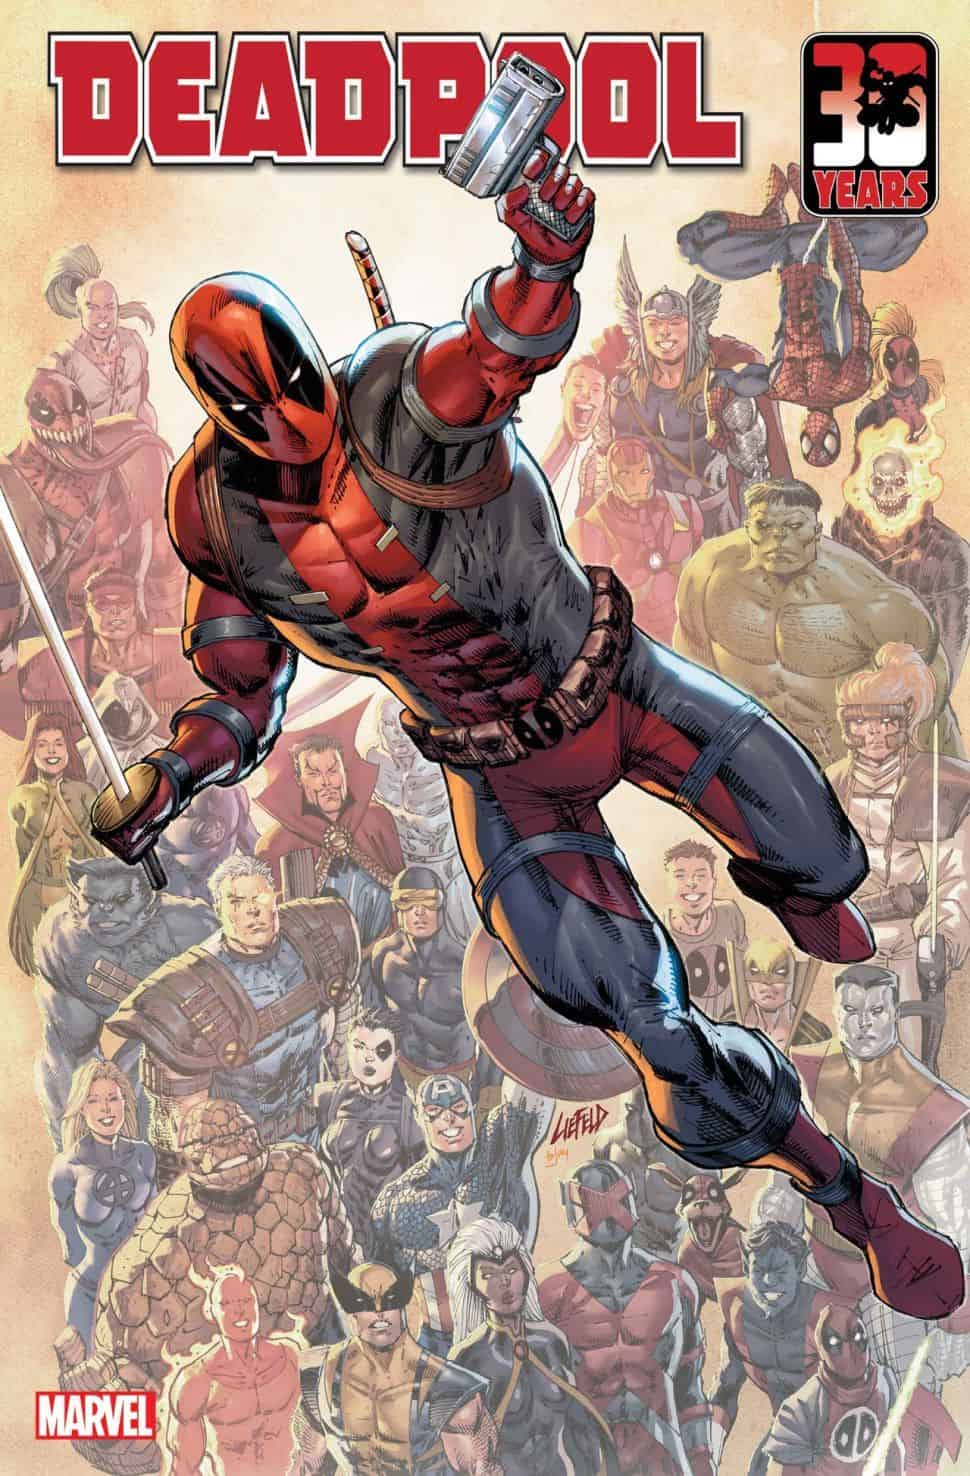 Marvel Comics & Deadpool Nerdy 30 #1 Spoilers: Rob Liefeld Shares A Sneak Peek Plus Exclusive Variant Covers! It’s A Dirty 30!